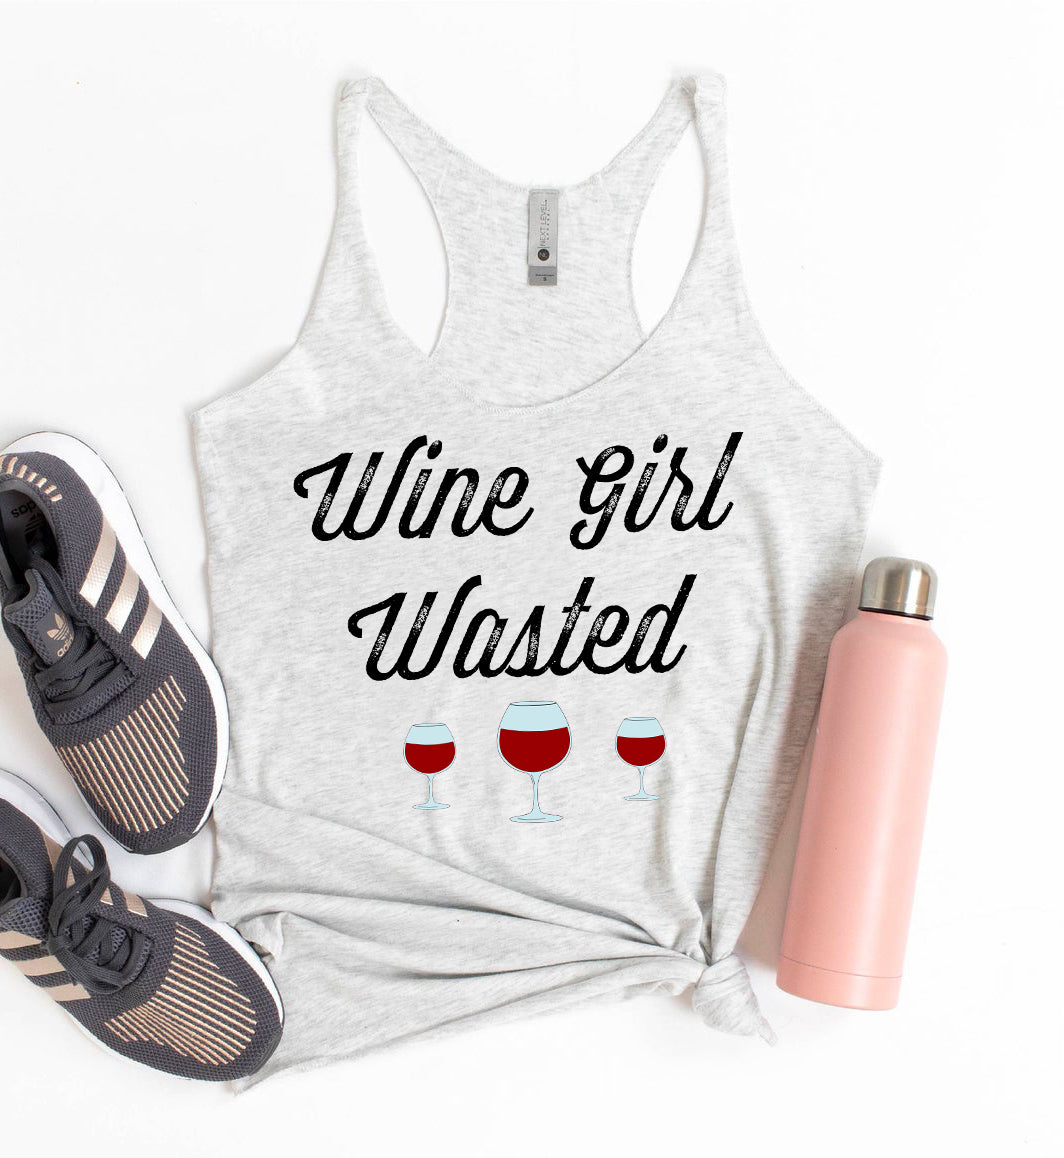 White tank top with wine glasses that says wine girl wasted - HighCiti